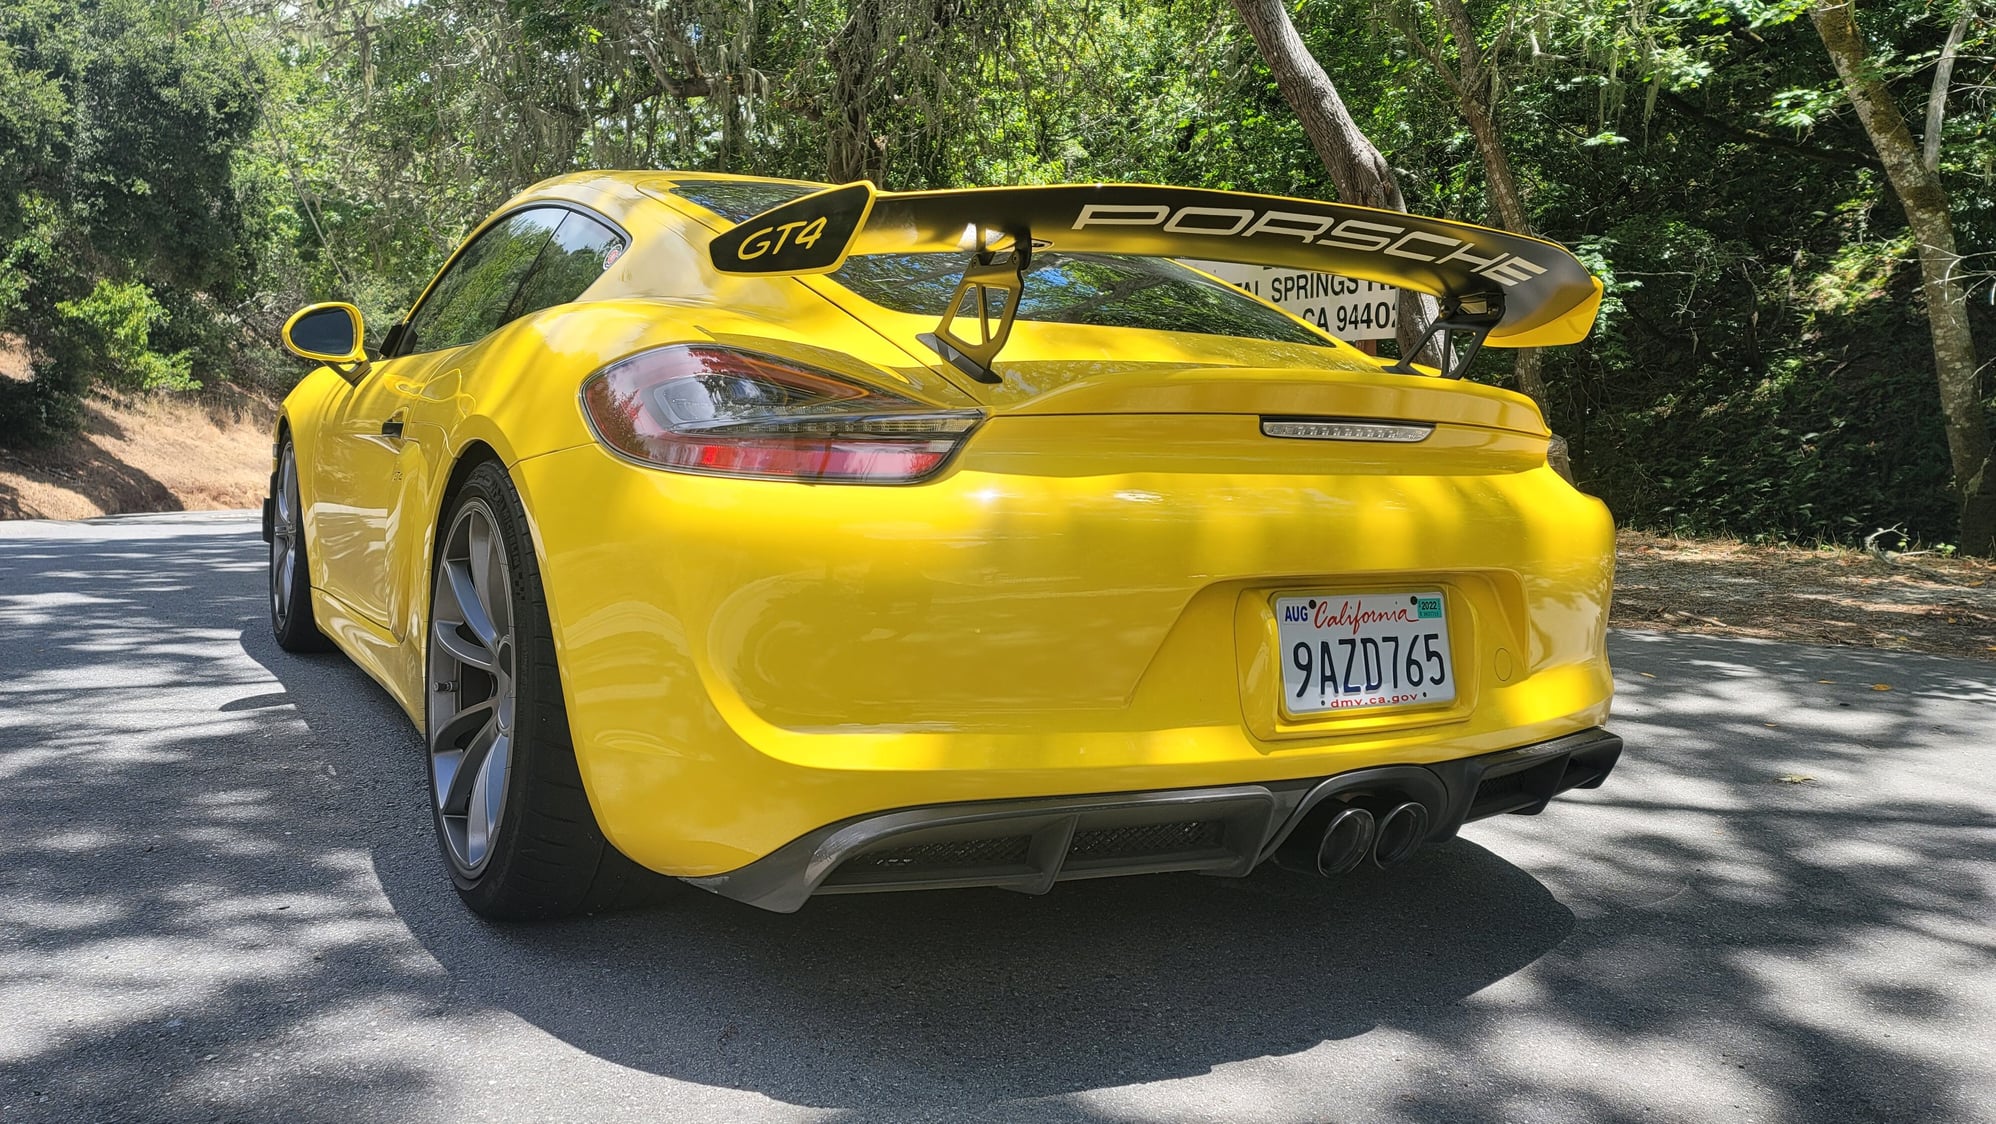 2016 Porsche Cayman GT4 - 2016 981 GT4 (Yellow) - 2nd Owner (California car) - Used - VIN clean carfax - 19,800 Miles - 6 cyl - 2WD - Manual - Coupe - Yellow - Millbrae, CA 94030, United States